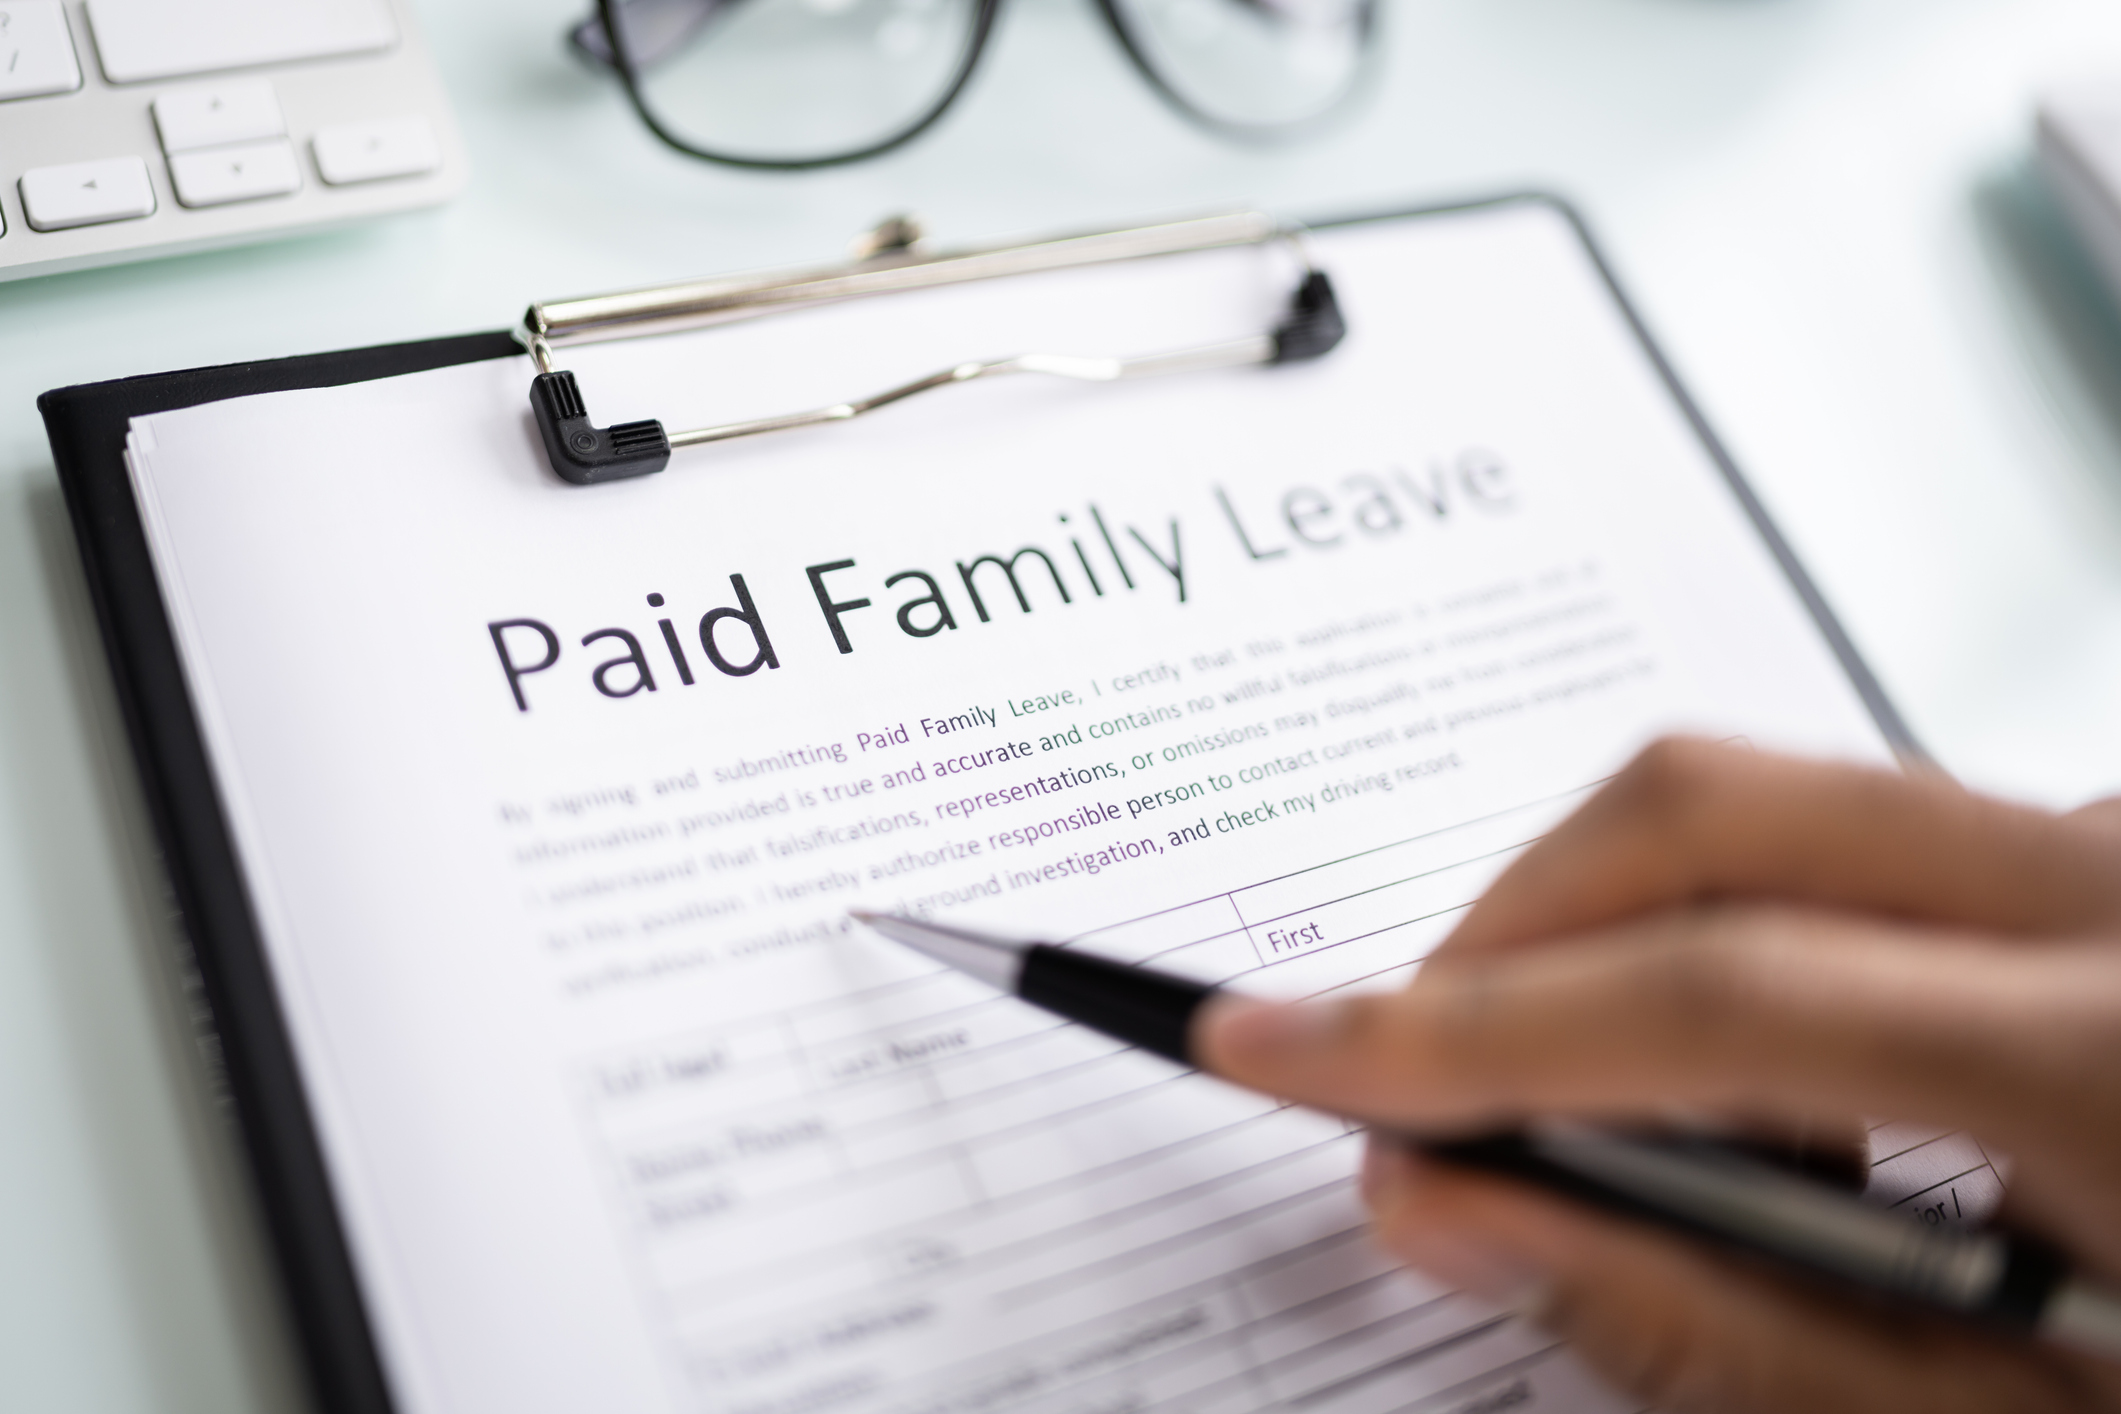 Misael Galdamez in Capital & Main: “Paid Family Leave Helps Women Keep Jobs”